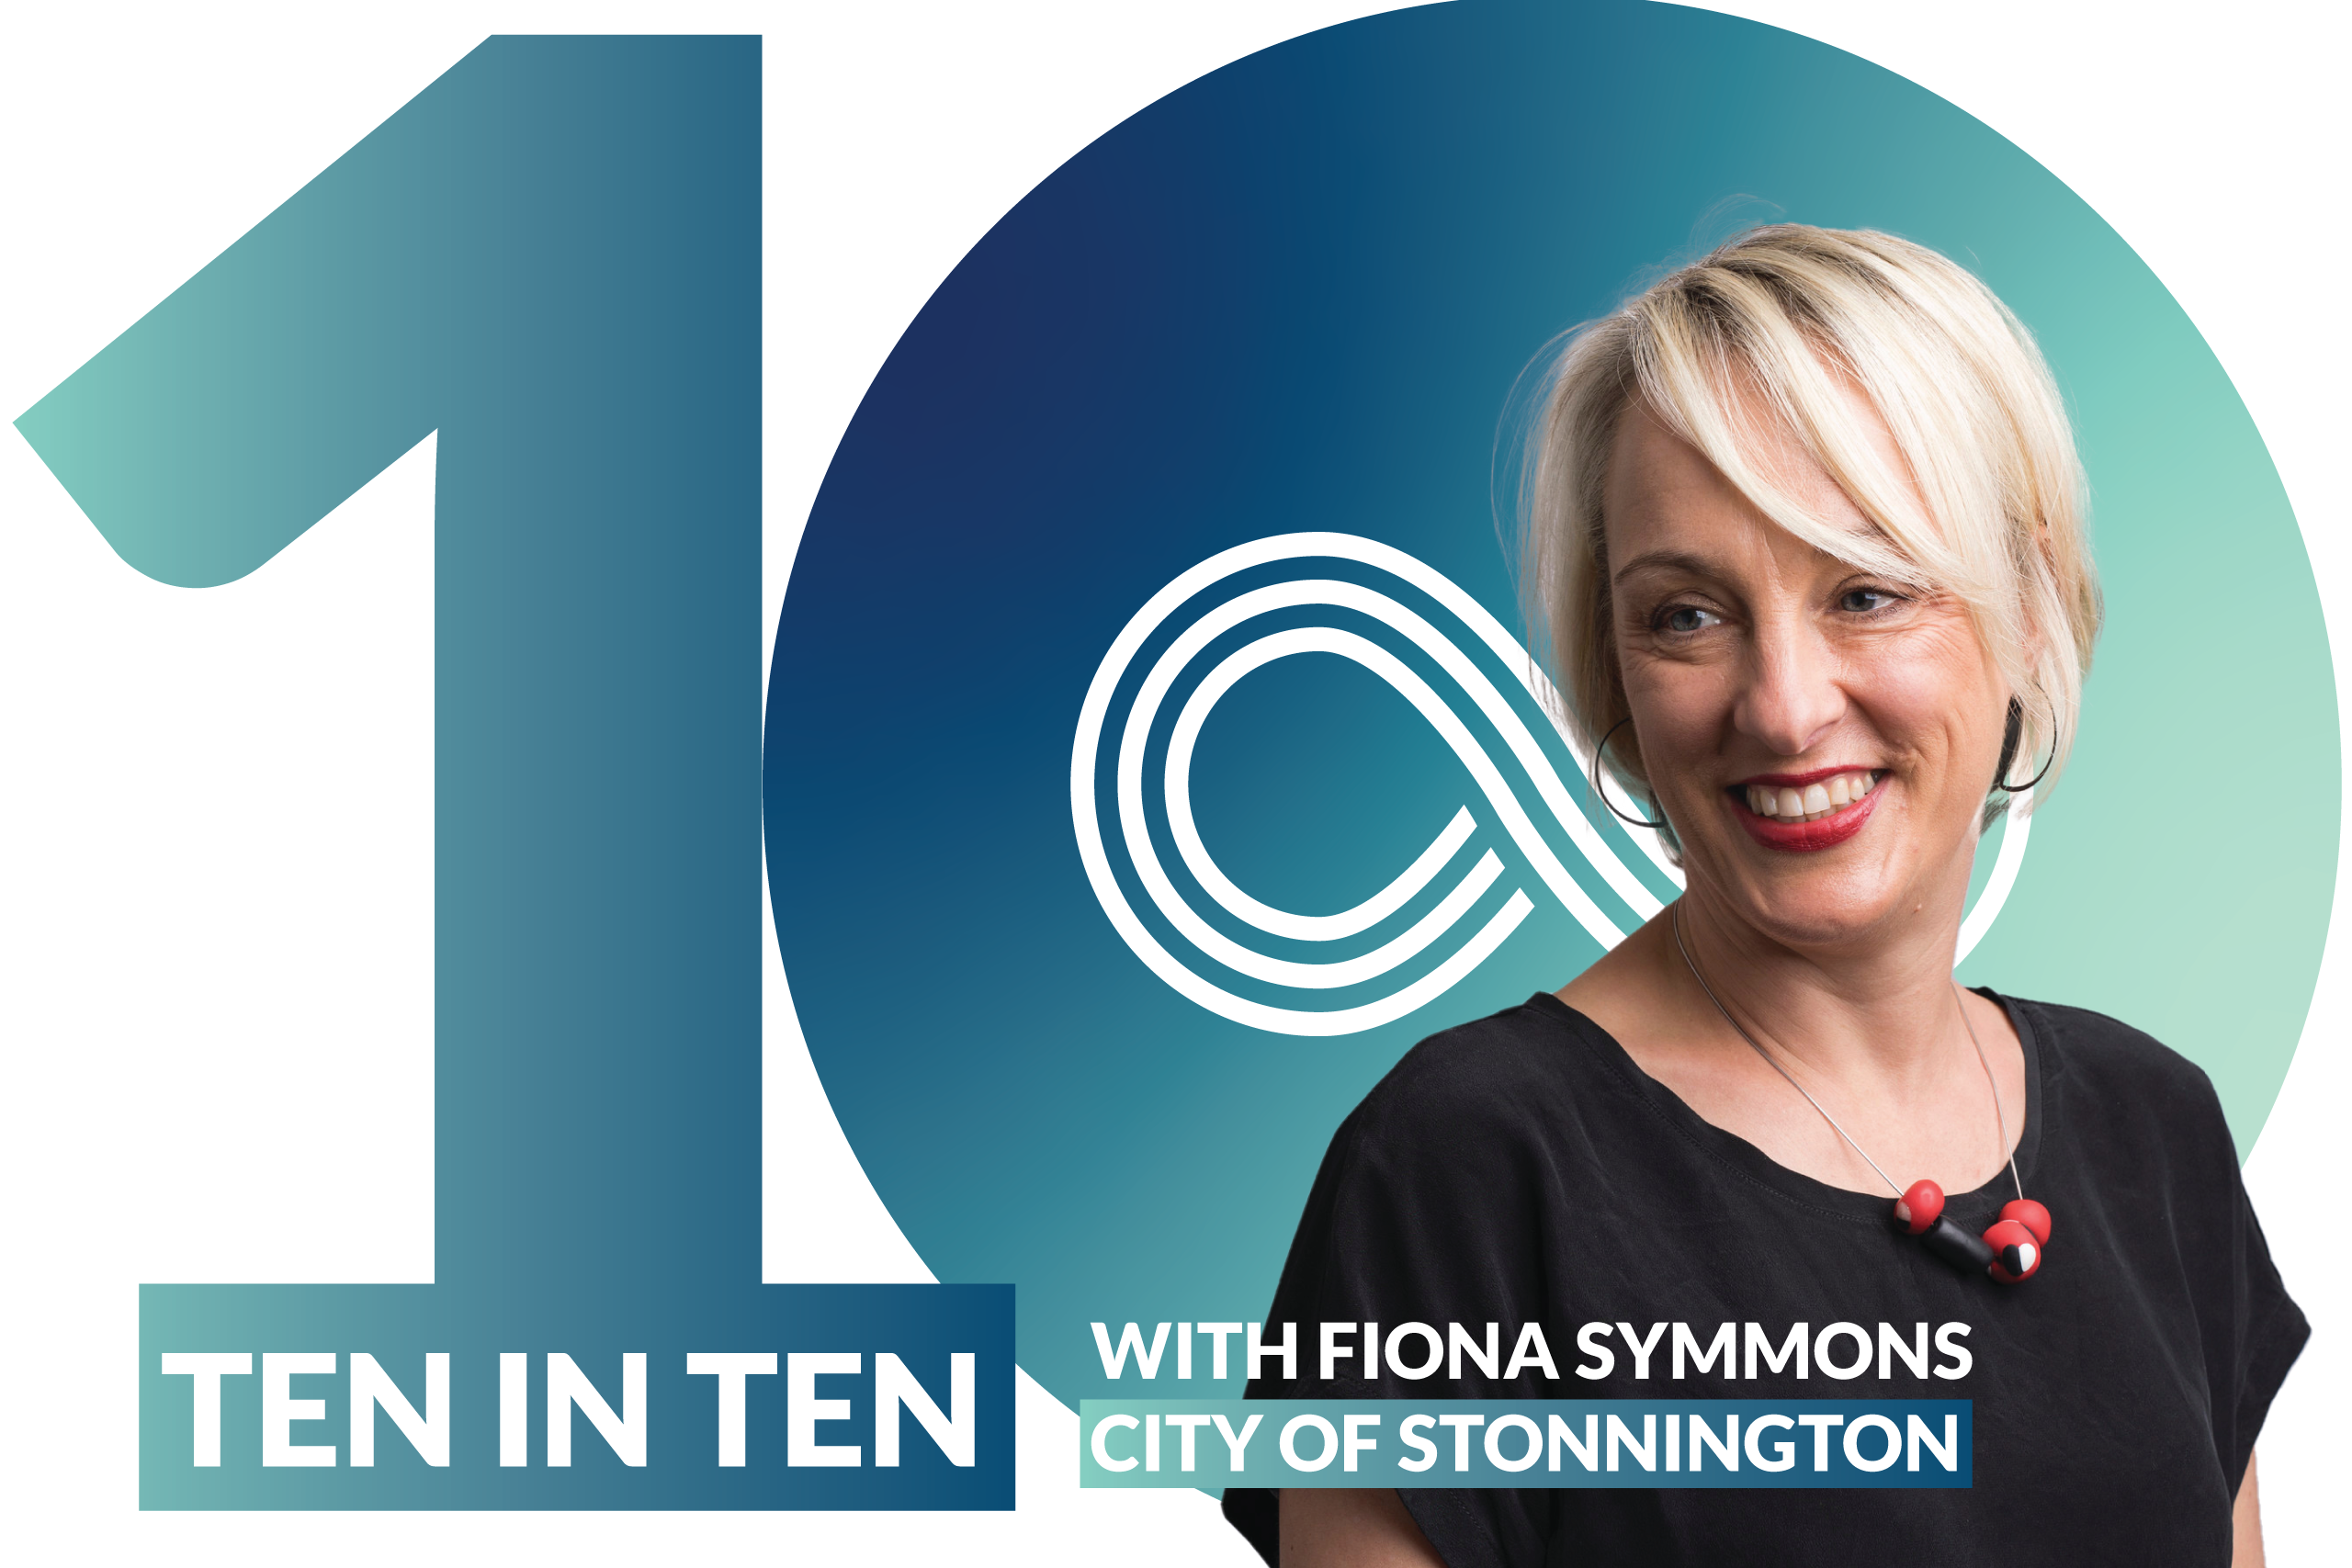 Fiona Symmons CX interview about customer experience and local government.